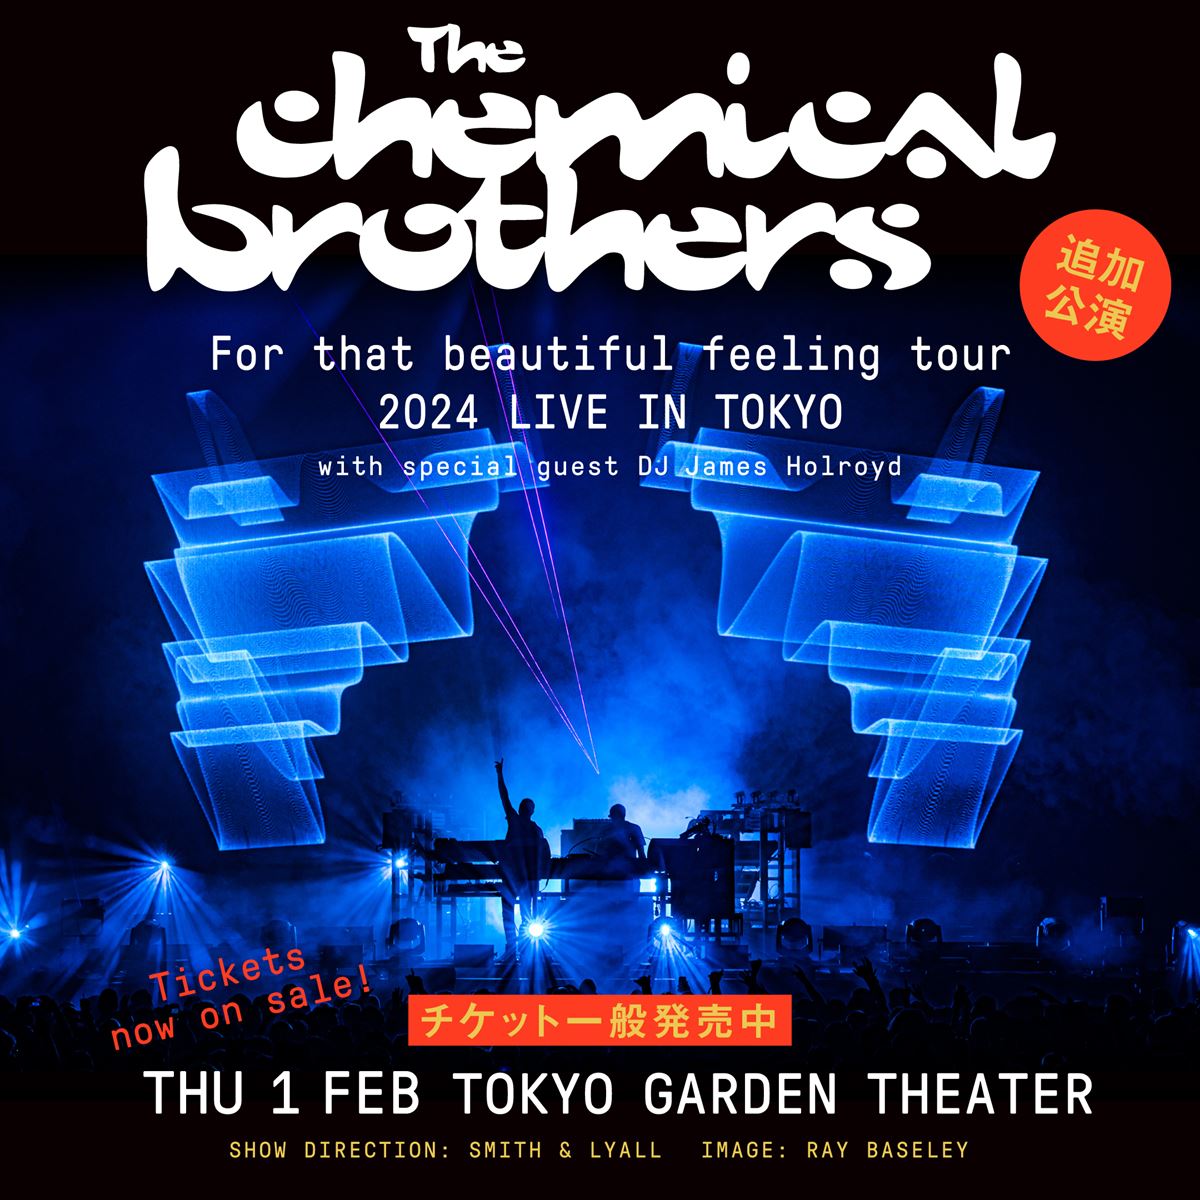 The Chemical Brothers 2/2(金) S席2枚ライブチケット